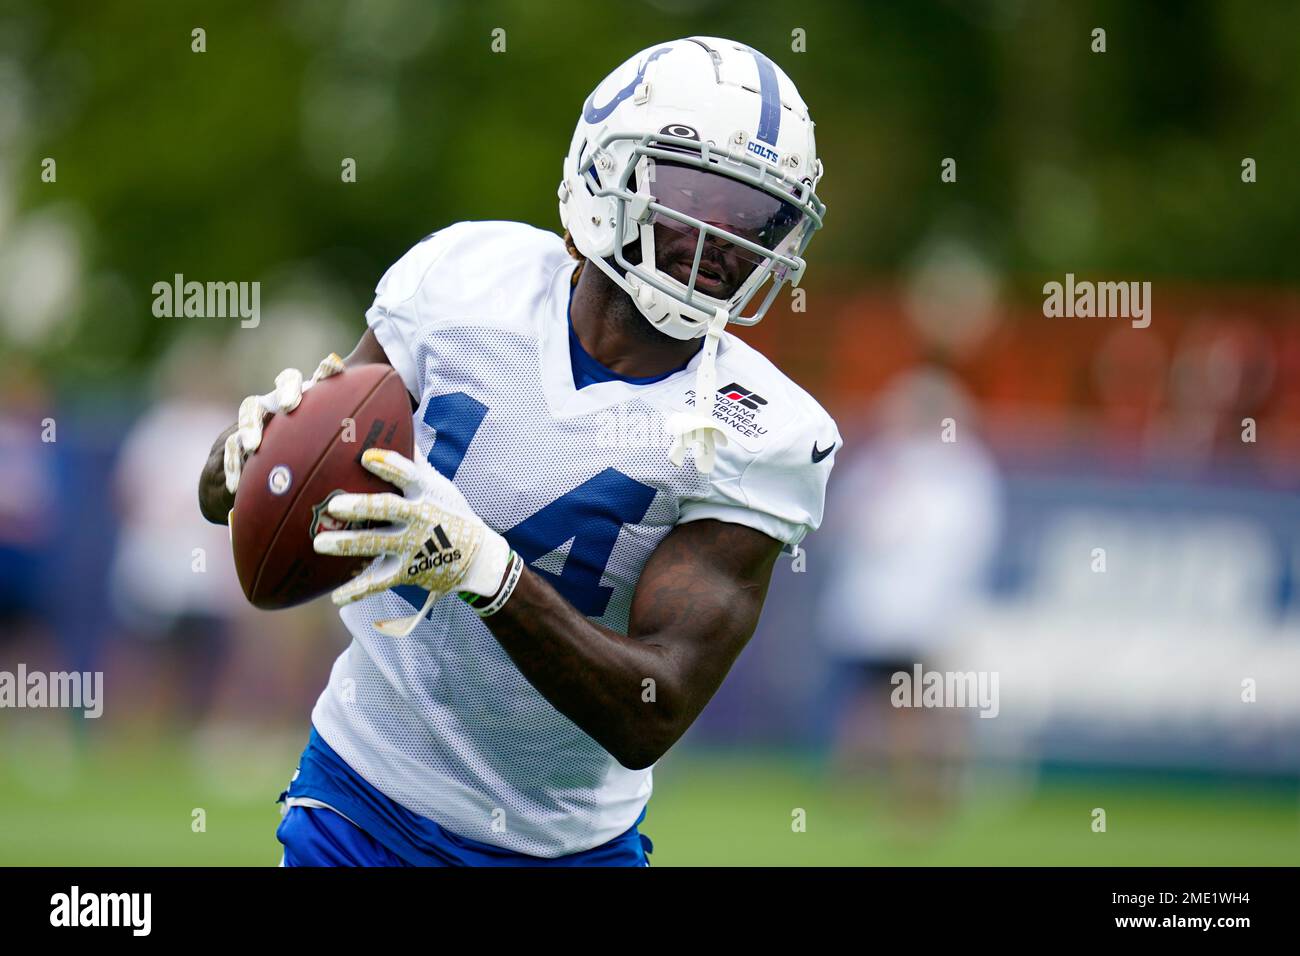 Indianapolis Colts wide receiver Zach Pascal runs a drill during practice  at the NFL team's football training camp in Westfield, Ind., Thursday, July  29, 2021. (AP Photo/Michael Conroy Stock Photo - Alamy